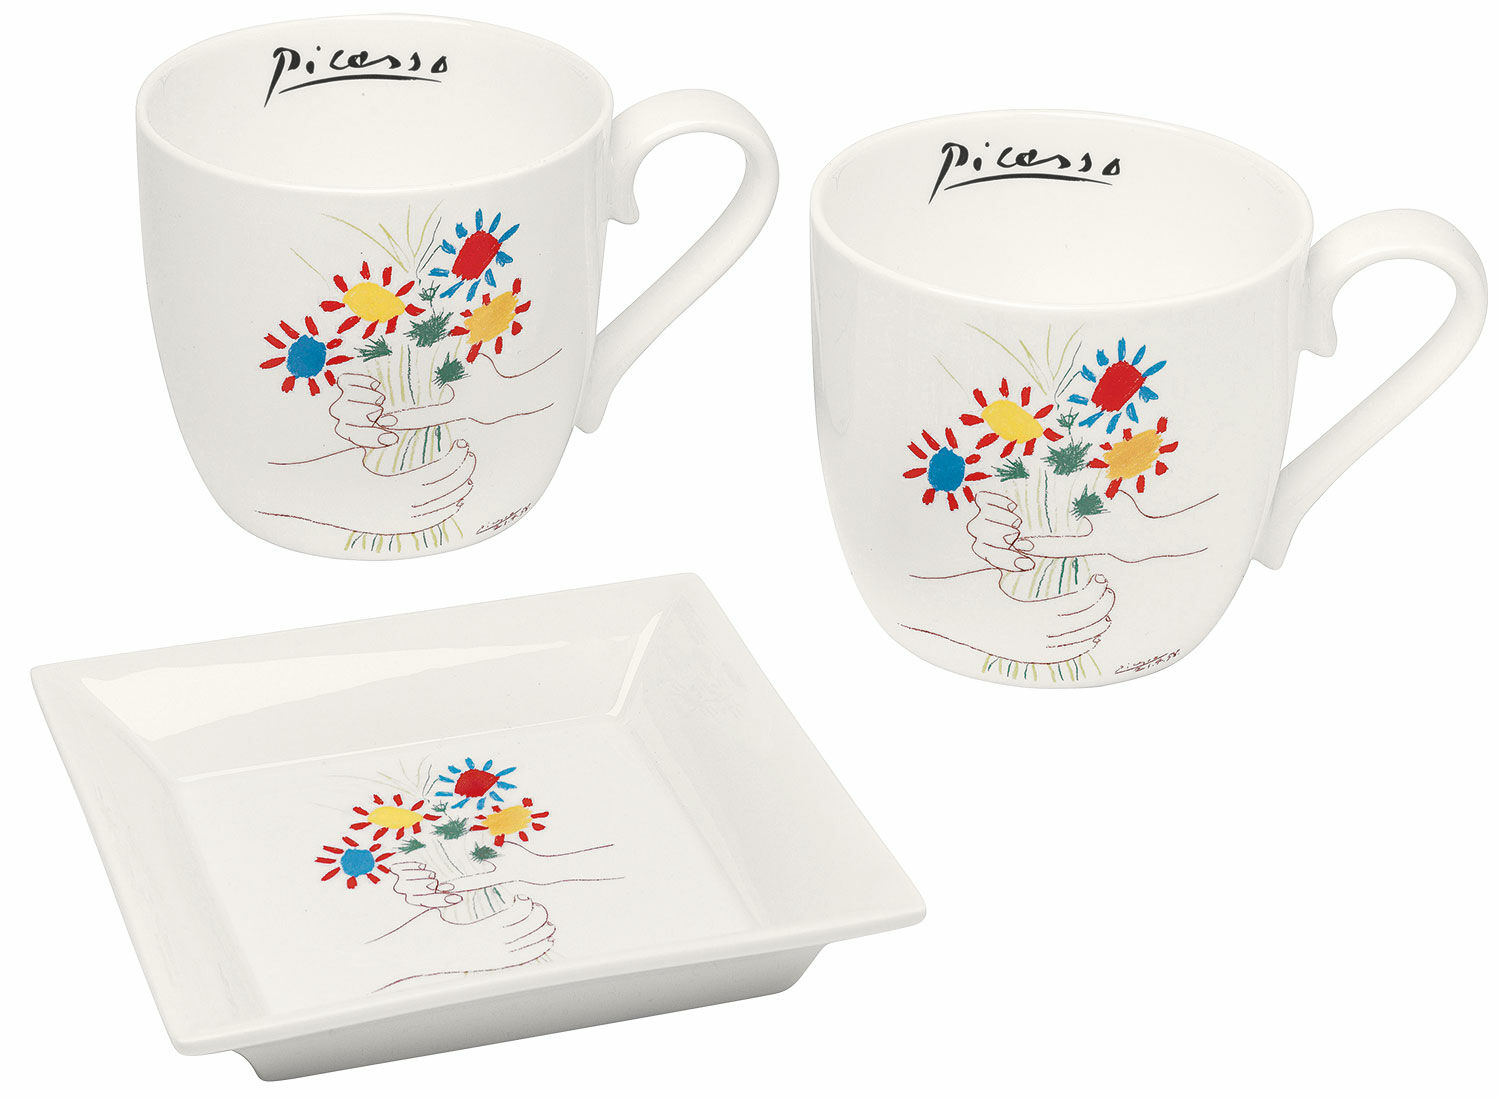 3-Piece porcelain set "Hands with Bouquet of Flowers" by Pablo Picasso